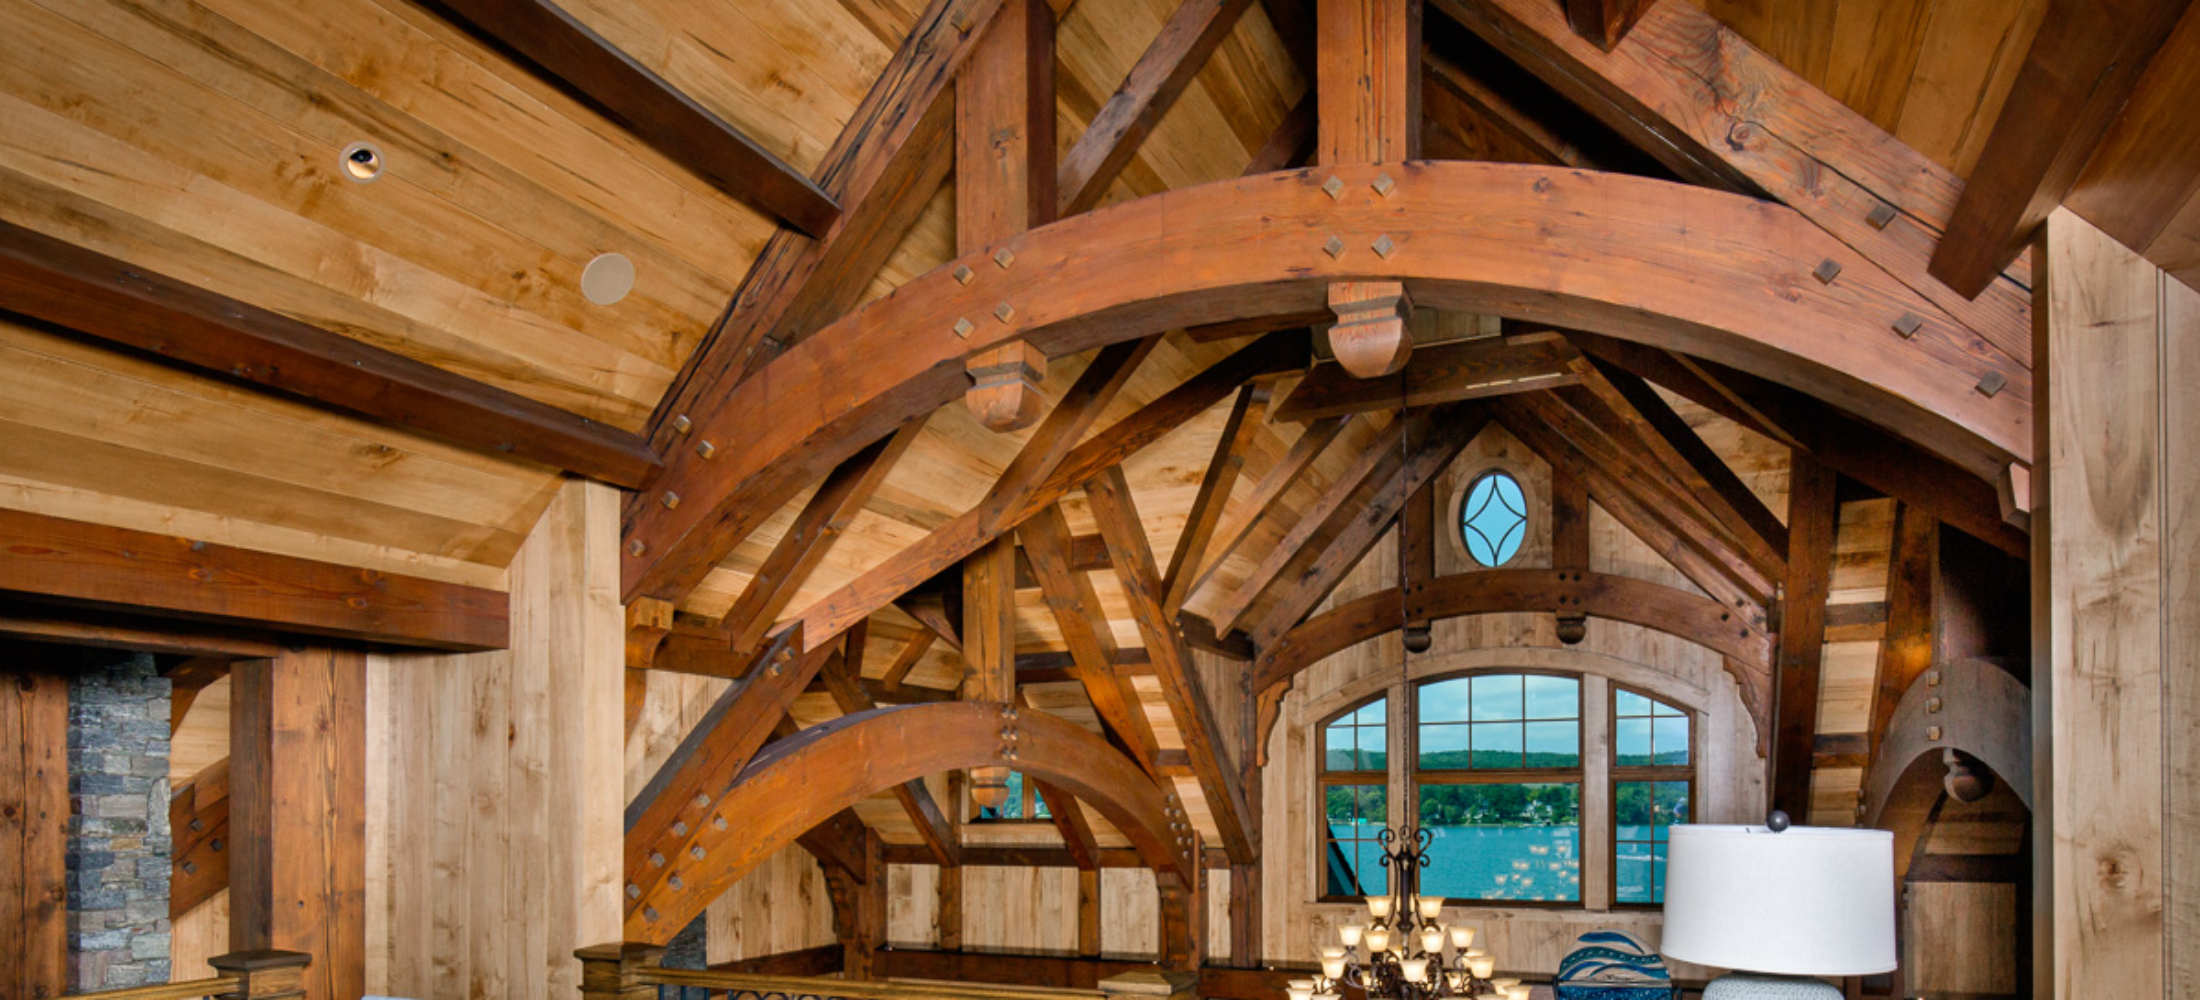 Curved trusses in home